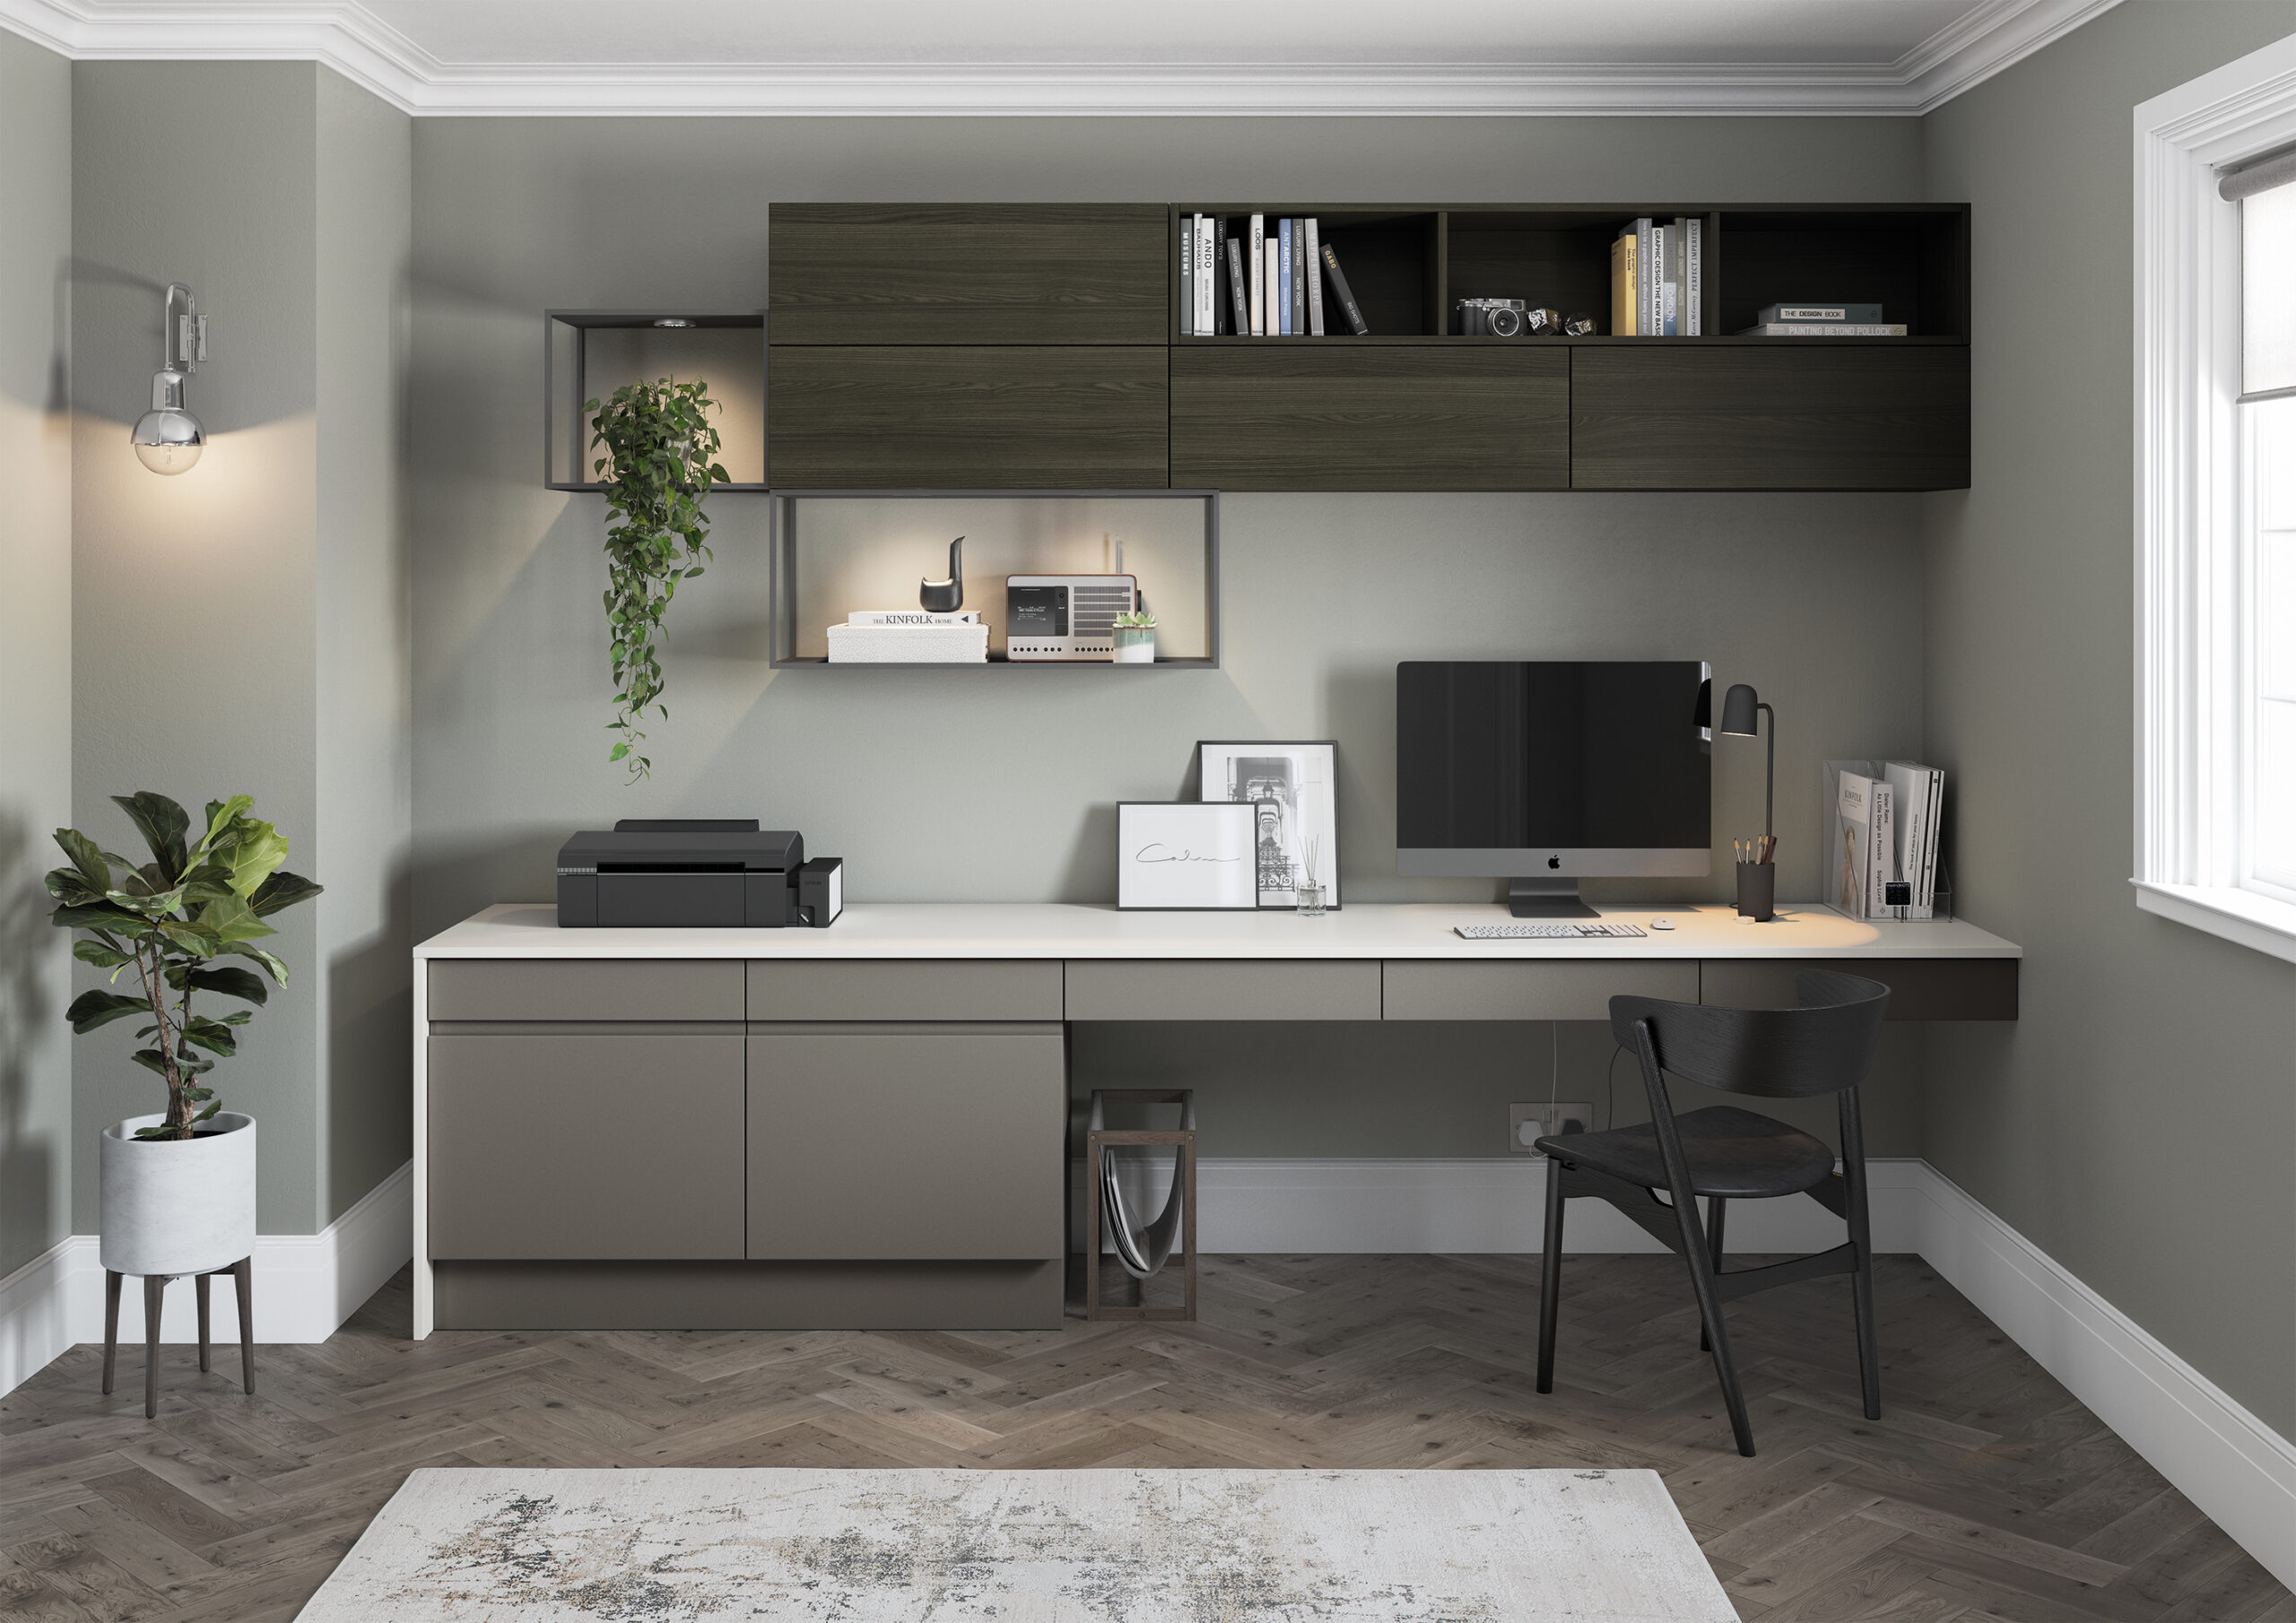 Home Office Design Inspiration - newrooms